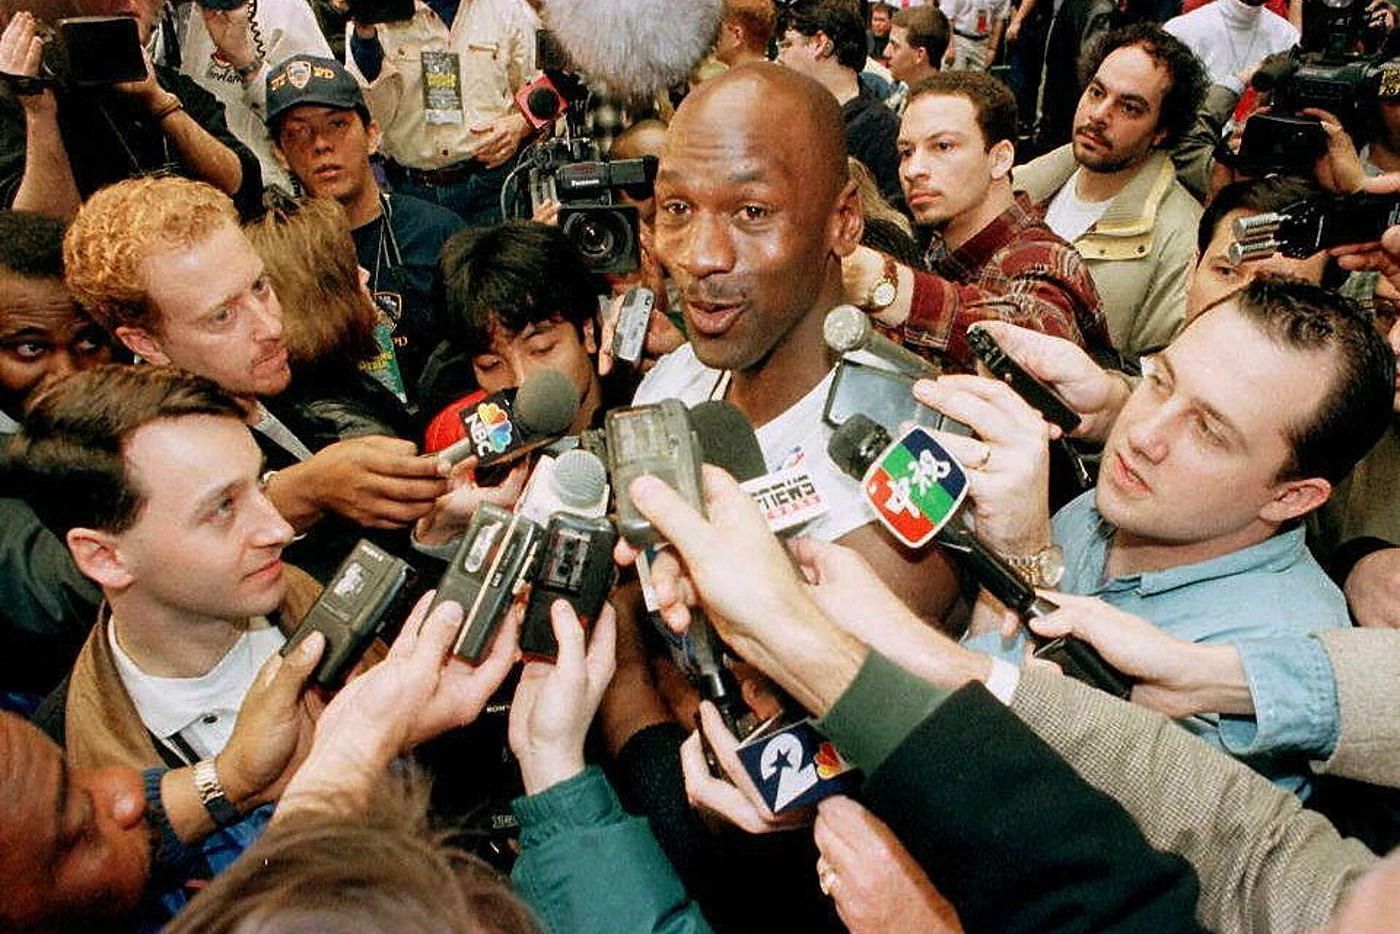 Michael Jordan surrounded by a hoard of media press